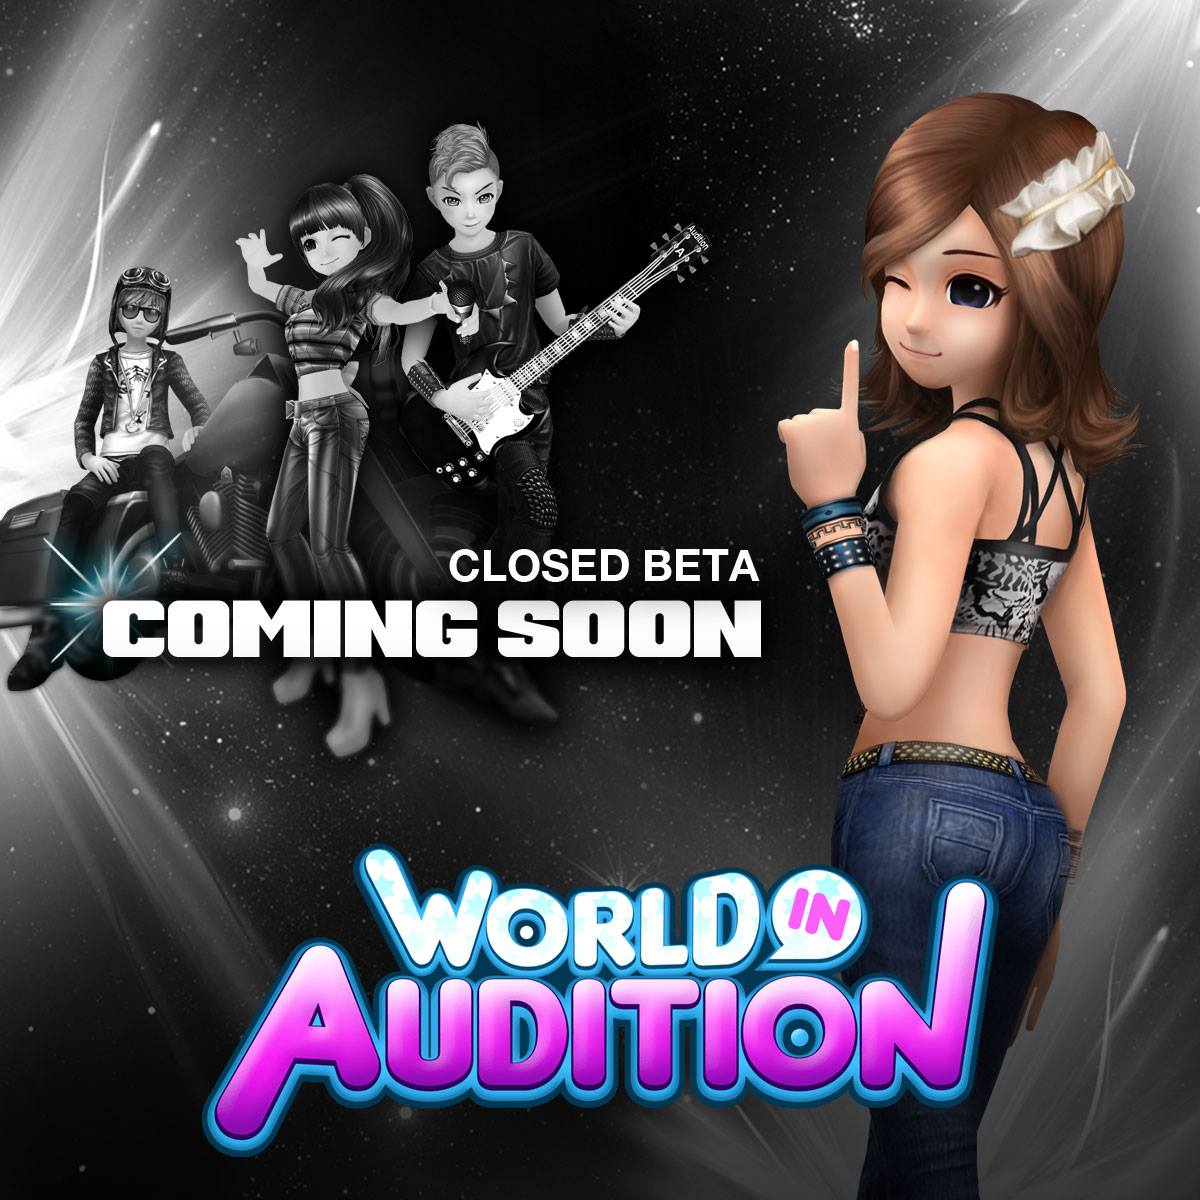 World-in-Audition-teaser